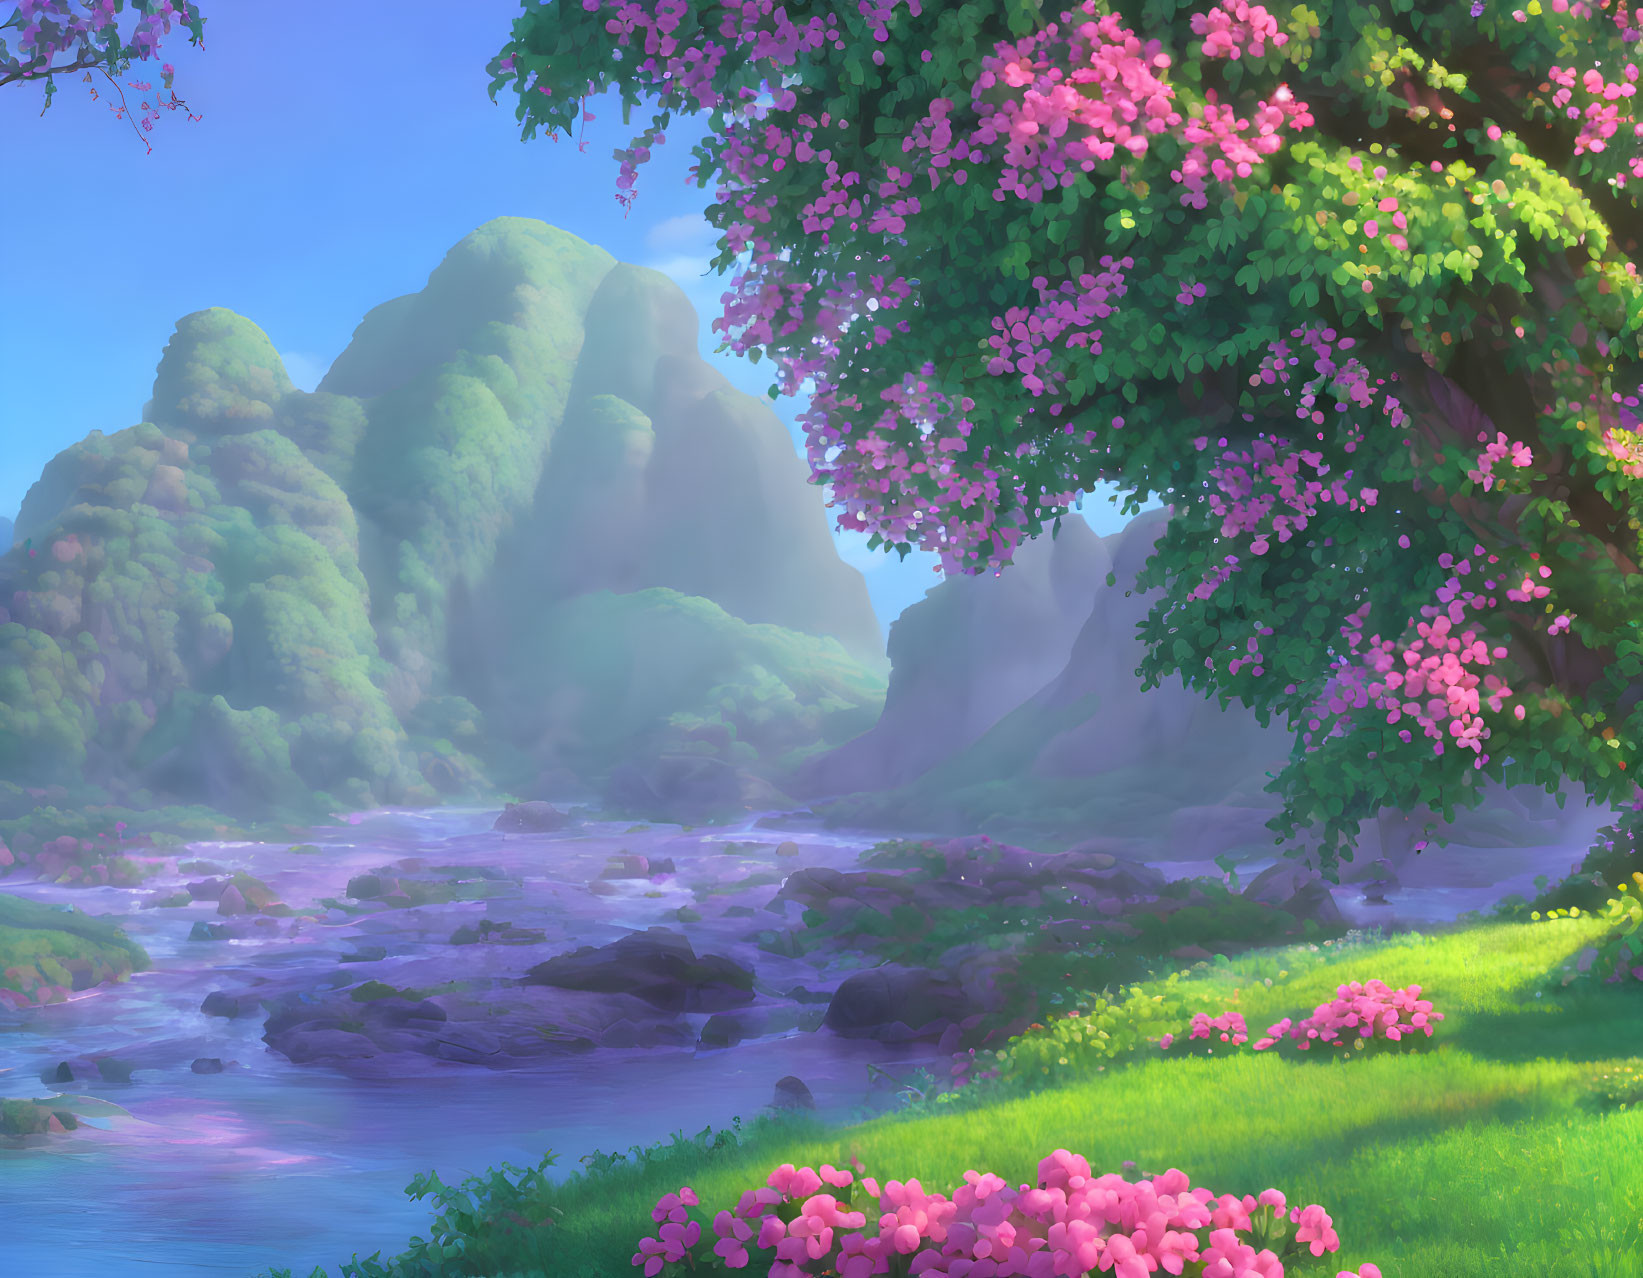 Tranquil landscape with green hills, flowing river, pink flowering trees